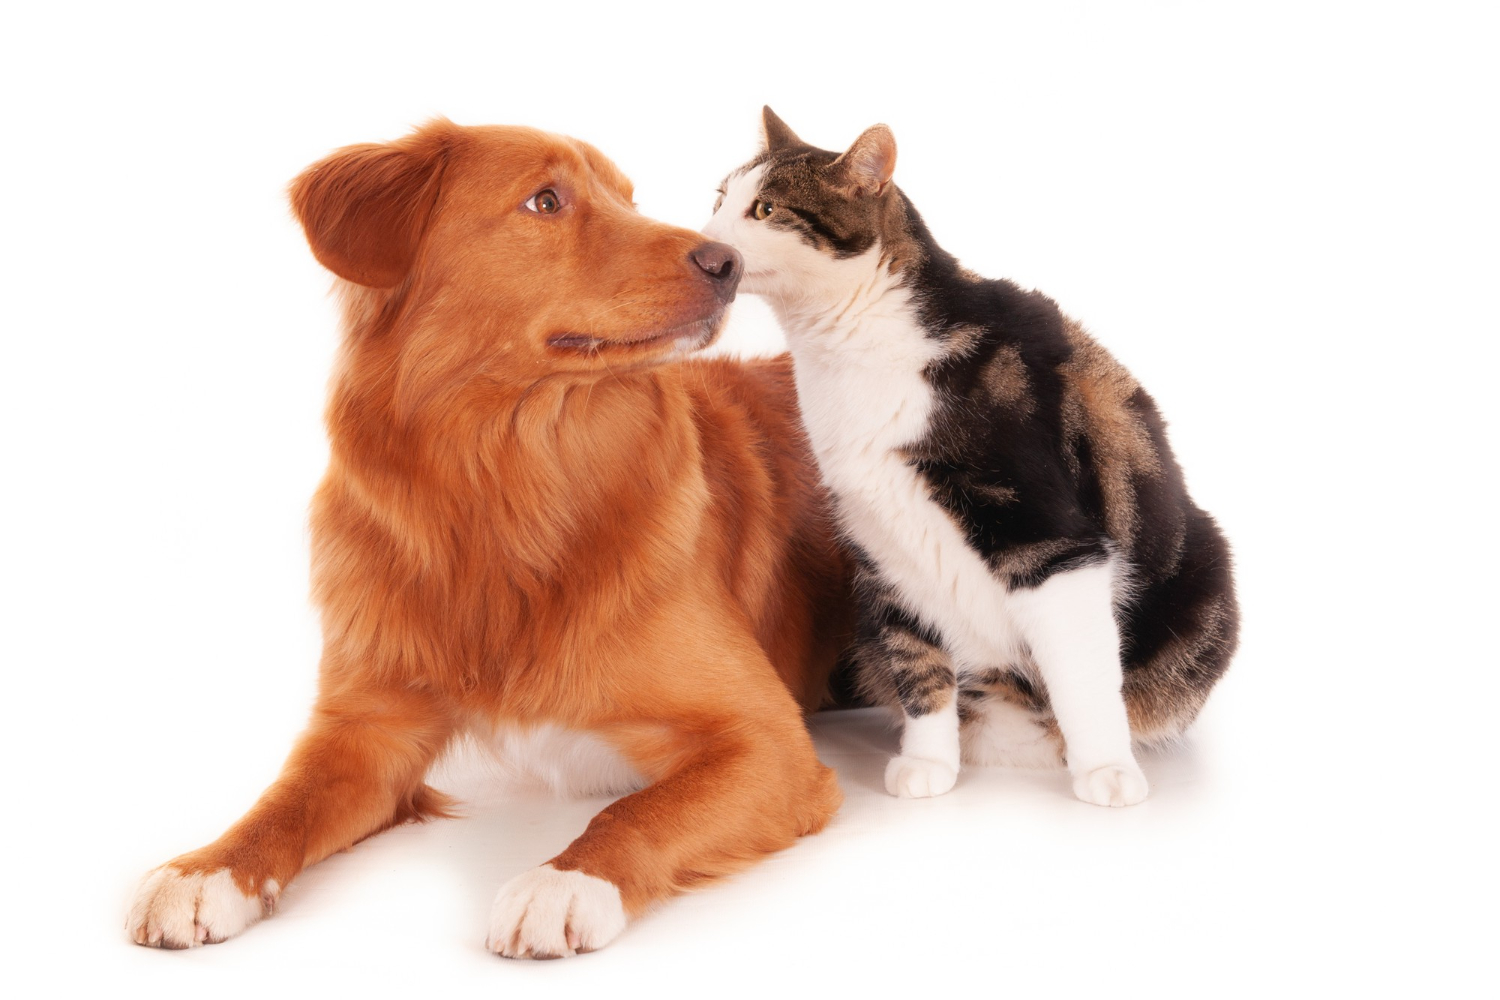 dog and cat smelling each other